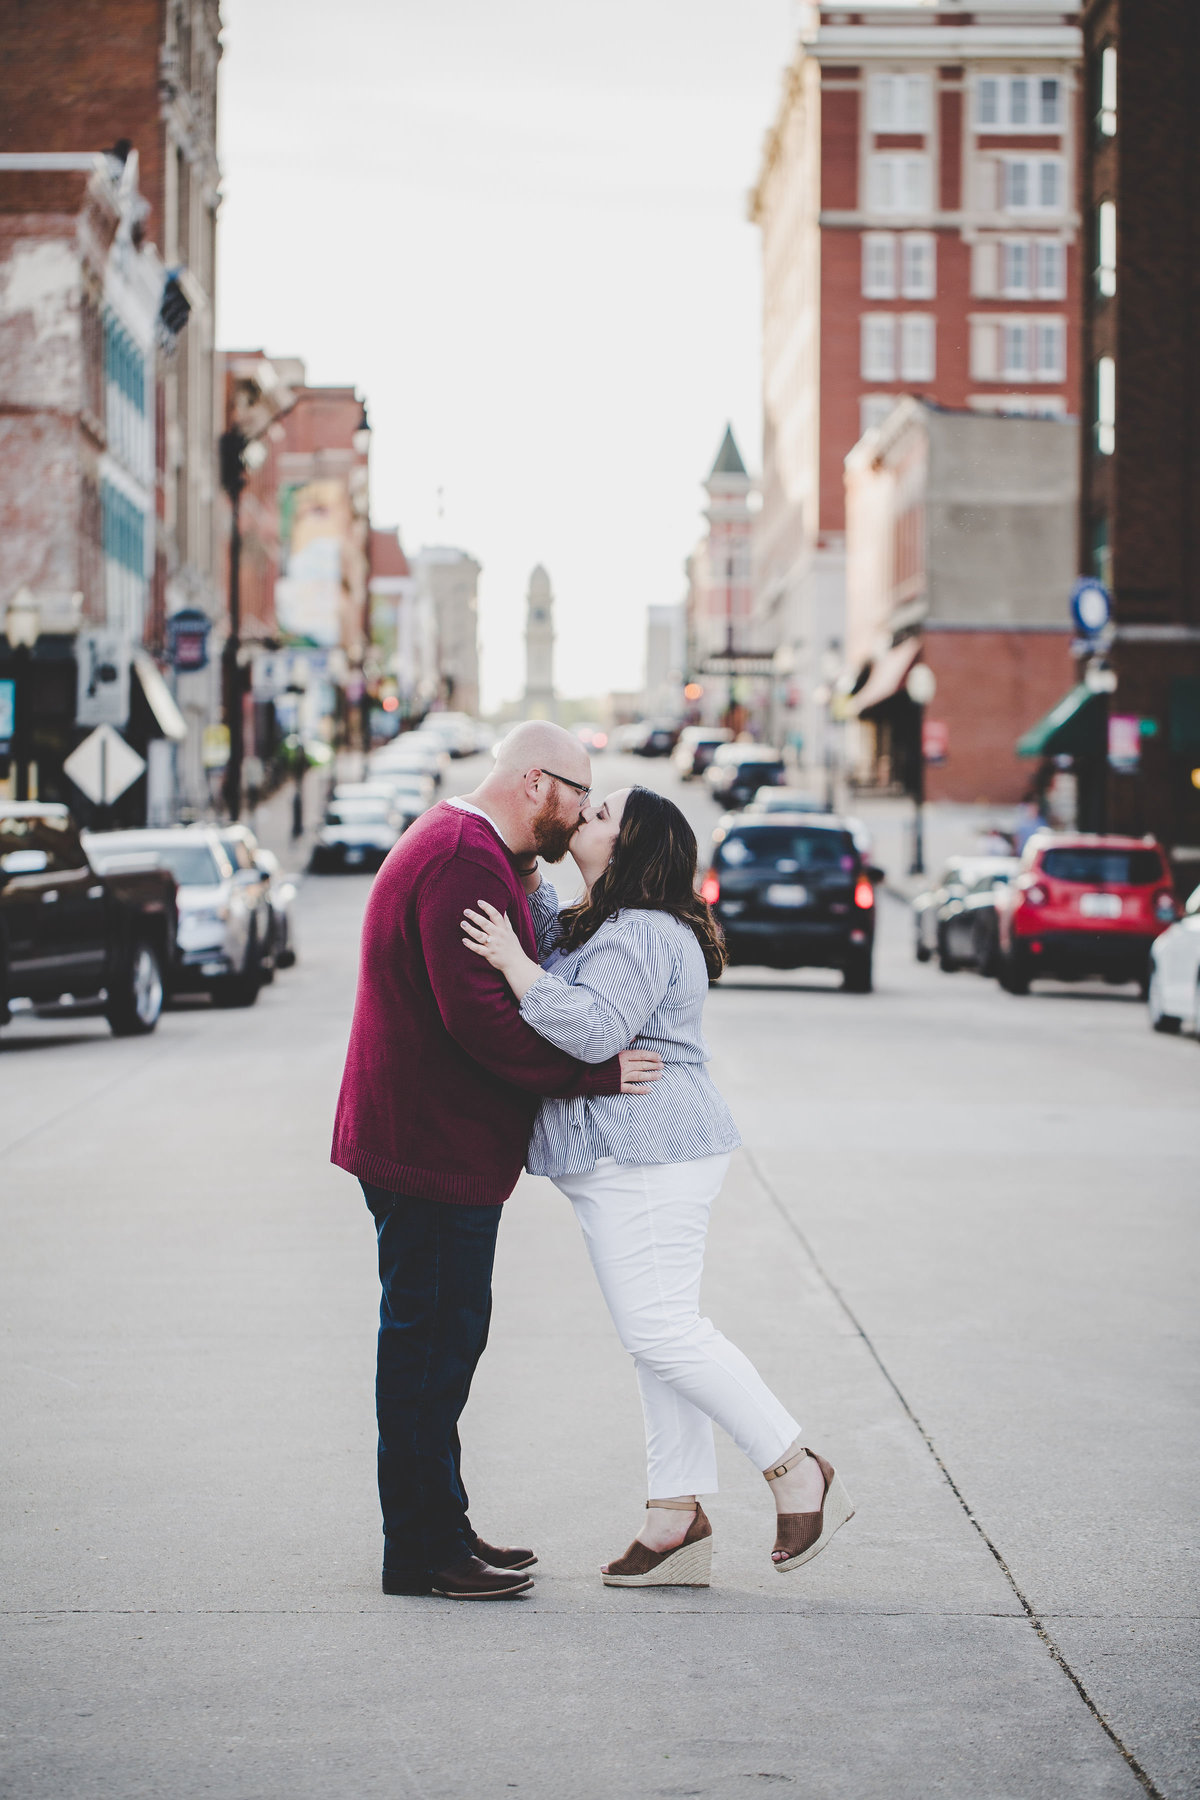 Midwest couples photographer   Iowa couples photographer   Iowa couples photography   PNW couples photographer   Utah couples photographer   Washington couples photography